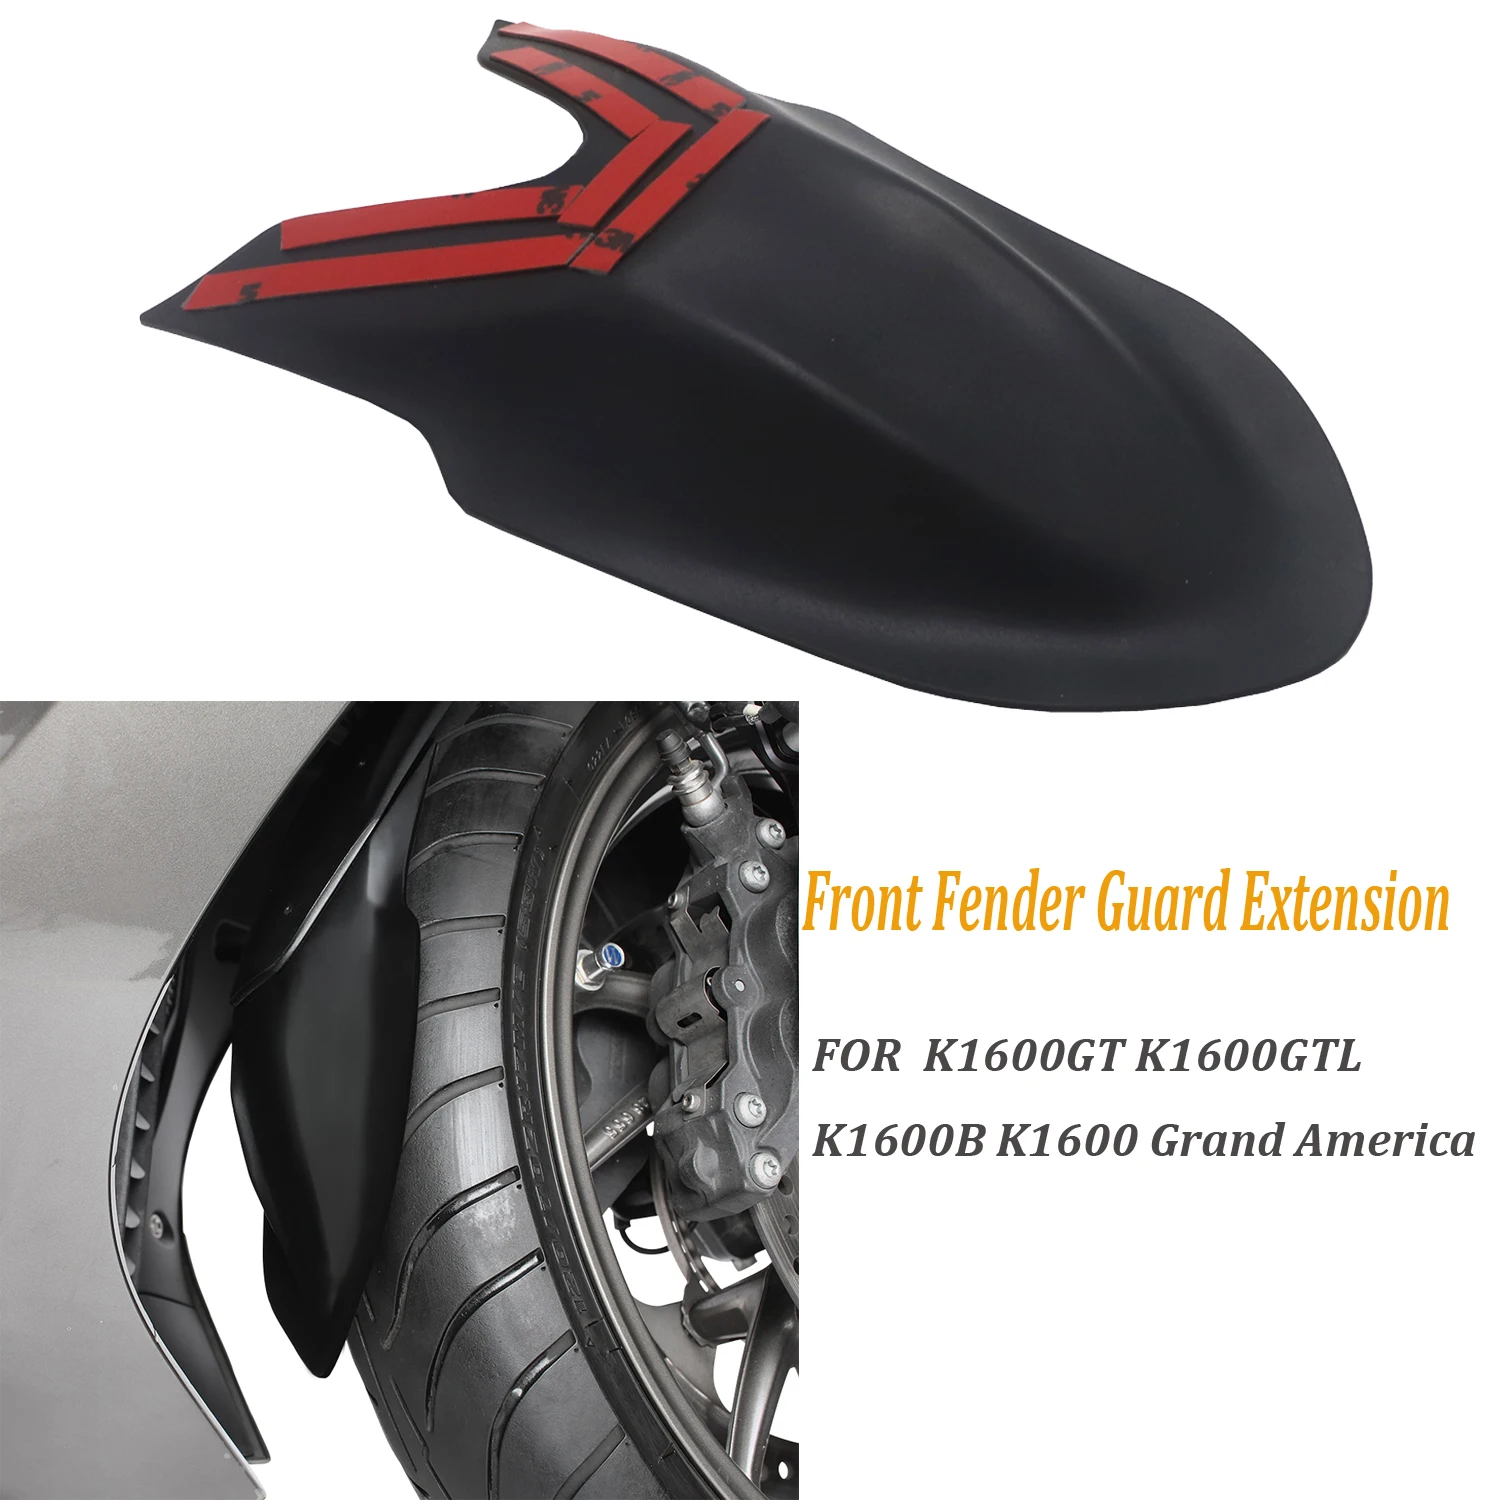 

FOR BMW K1600GT K1600GTL K1600B K1600 Grand America NEW Motorcycle Accessories ABS Front Fender Guard Extension K 1600 GT